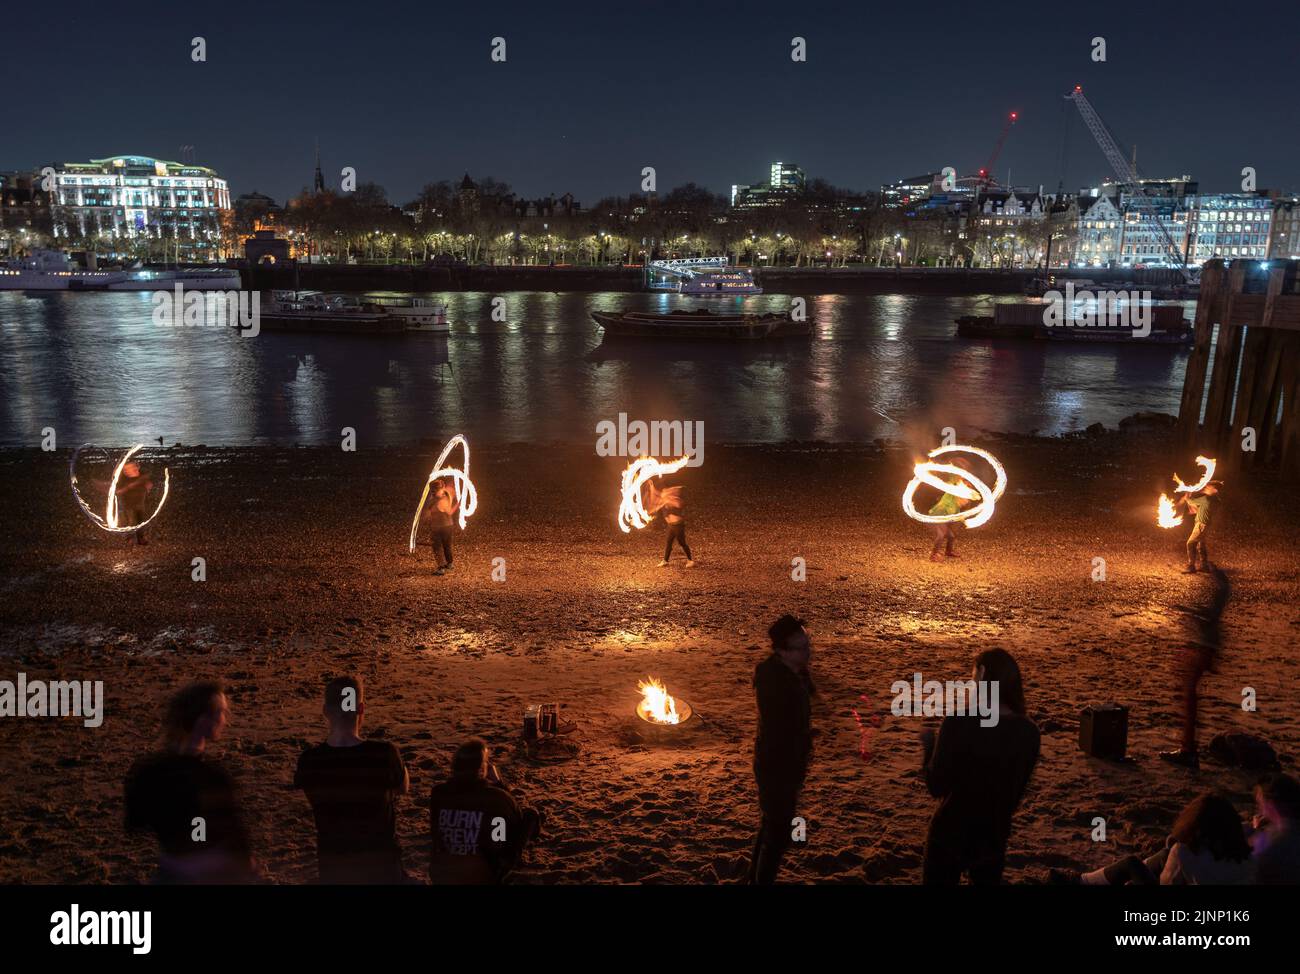 London, UK. 12th August, 2022. London Fire Spinners perform dramatic flame  acts on the Thames shore at Gabriel's Wharf during a warm Friday evening.  Credit: Guy Corbishley/Alamy Live News Stock Photo -